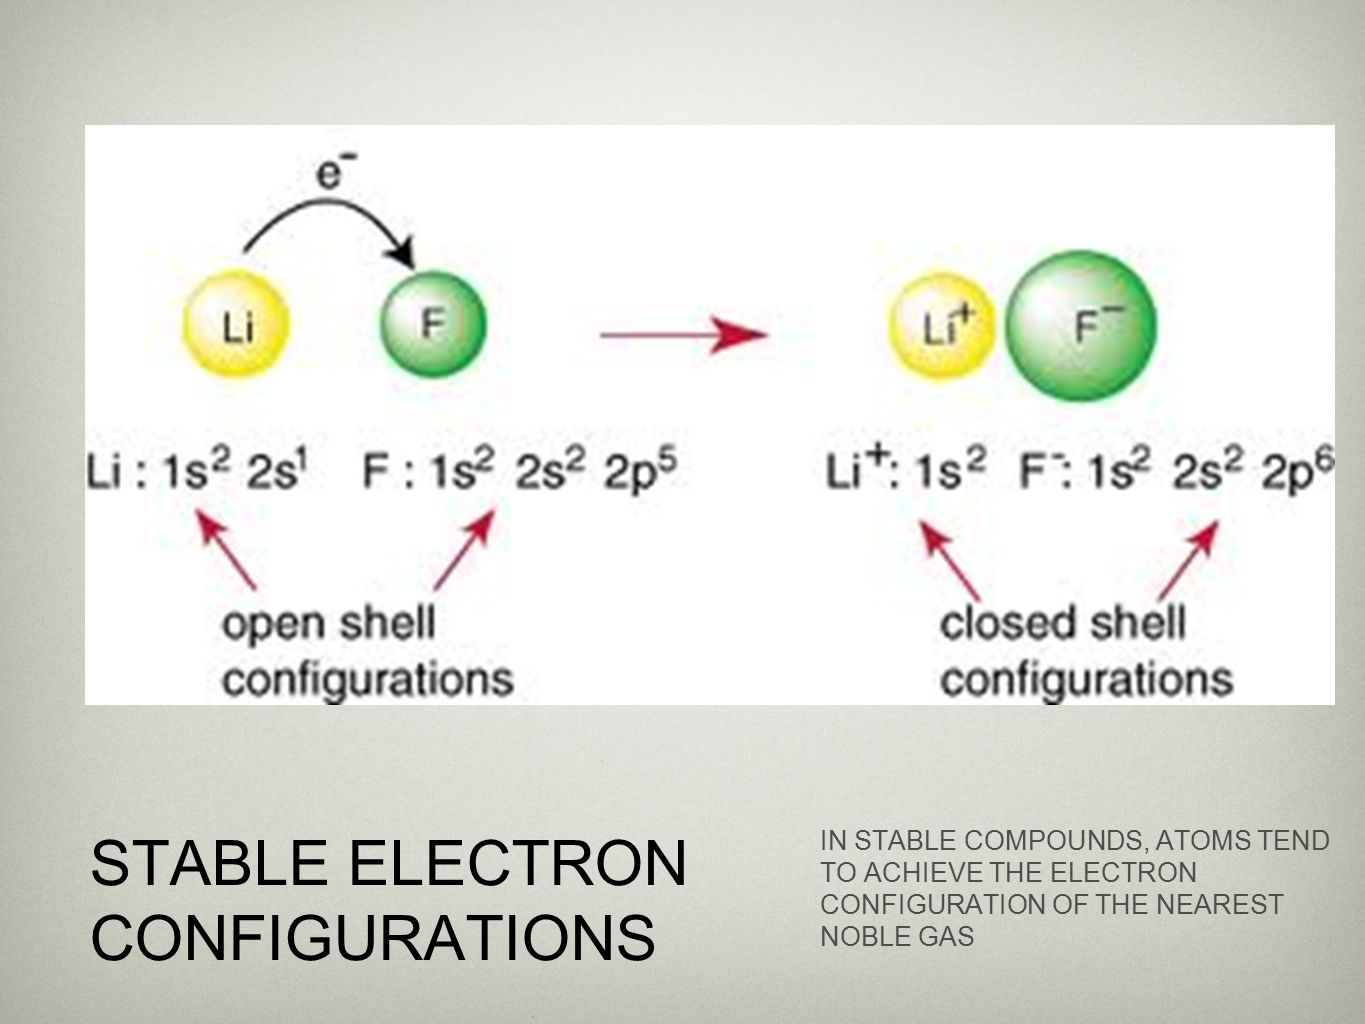 STABLE ELECTRON CONFIGURATIONS IN STABLE COMPOUNDS, ATOMS TEND TO ACHIEVE THE ELECTRON CONFIGURATION OF THE NEAREST NOBLE GAS